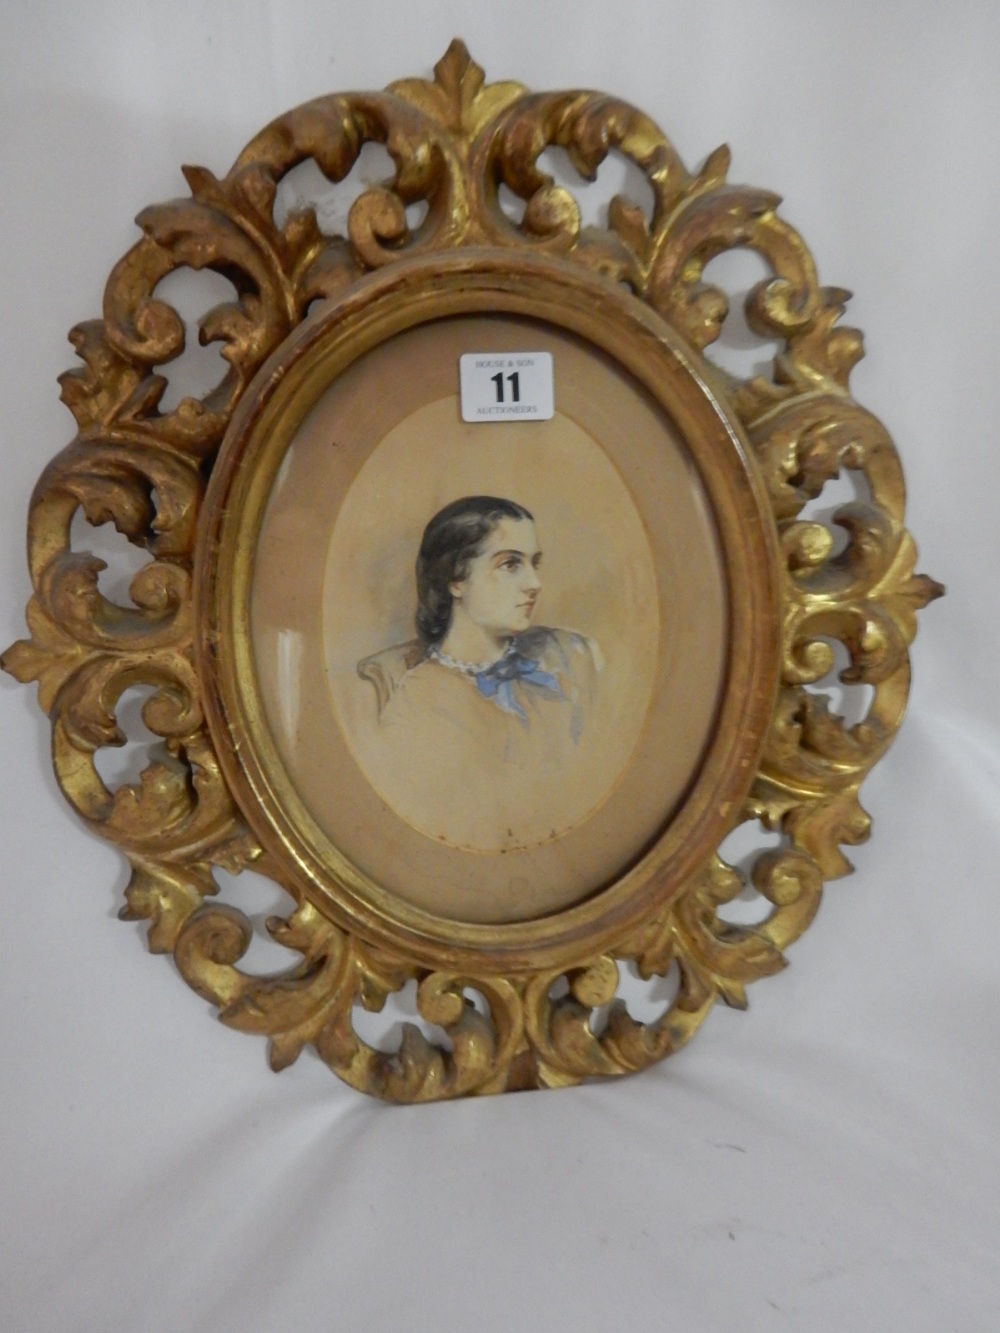 A Victorian watercolour in an oval - Head and shoulders of a girl, in a Florentine frame - 6 1/